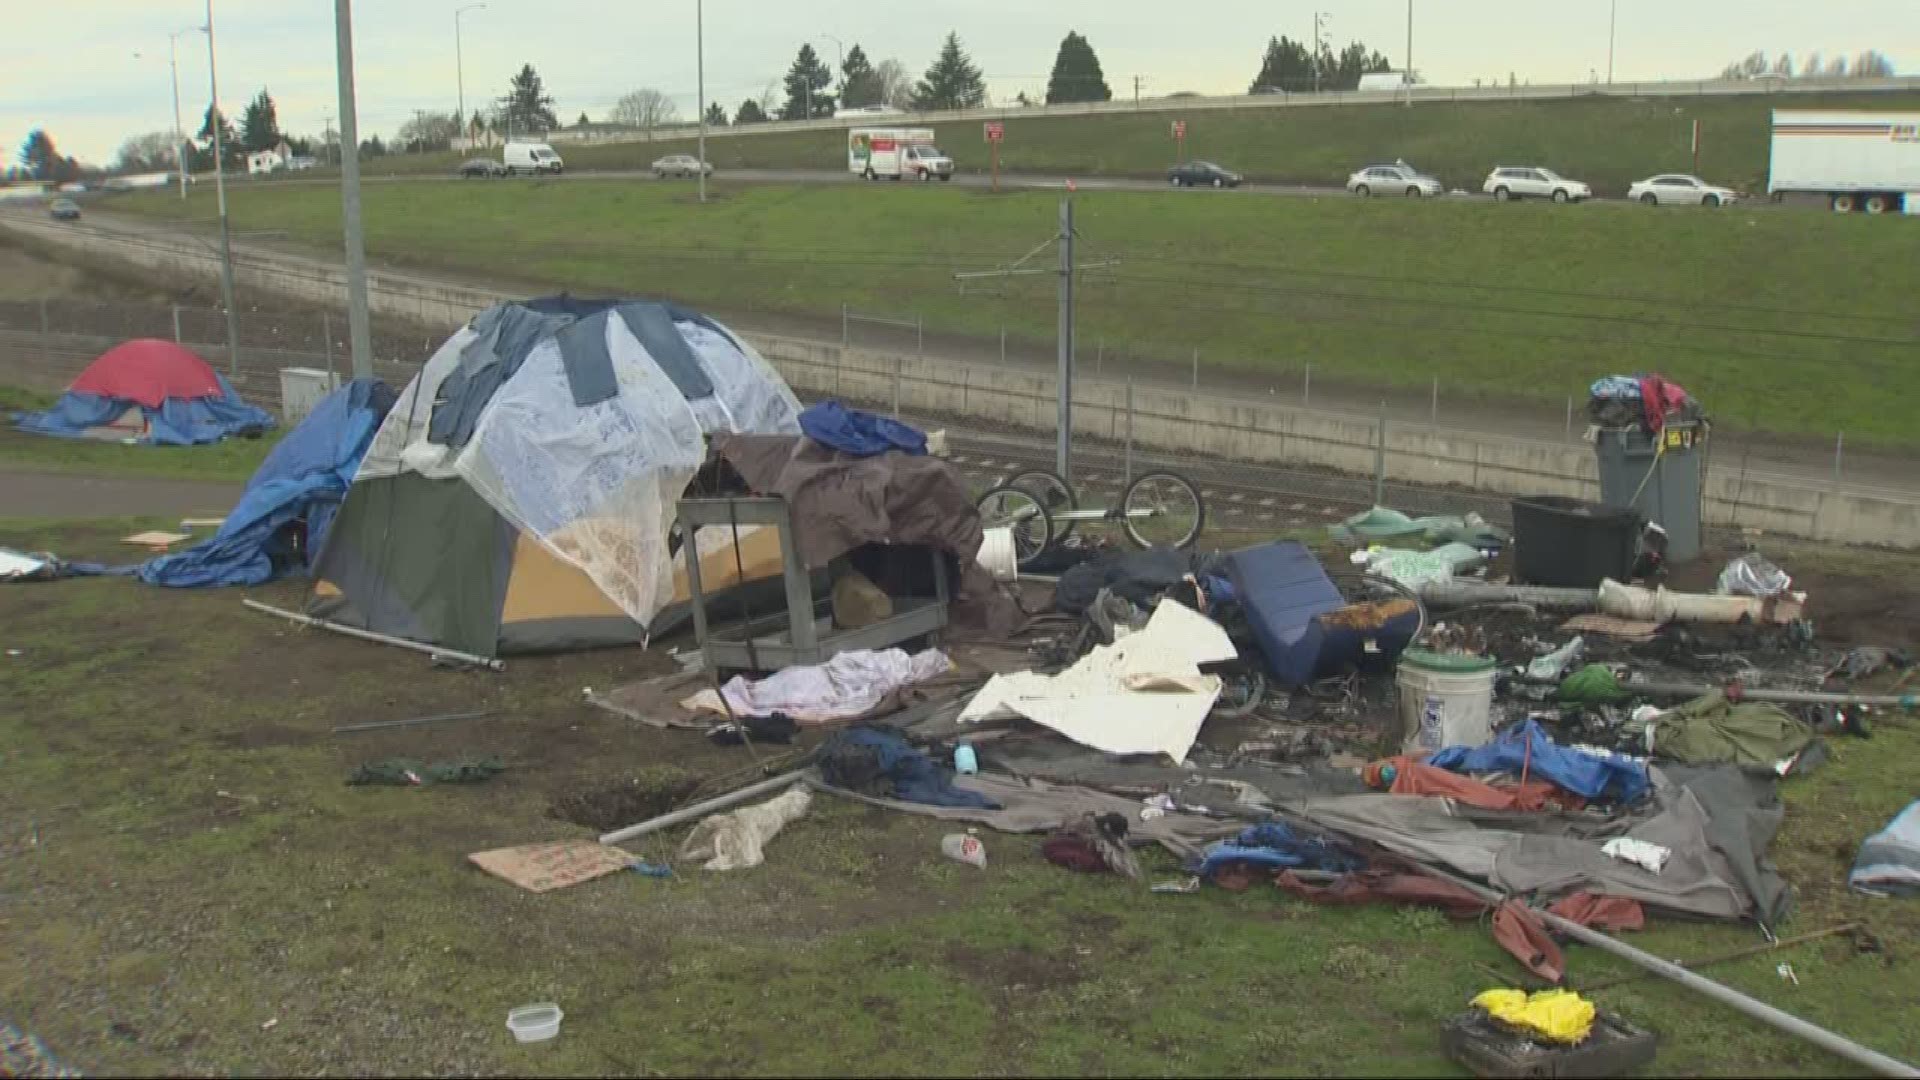 Portland can now remove homeless camps from land owned by ODOT.